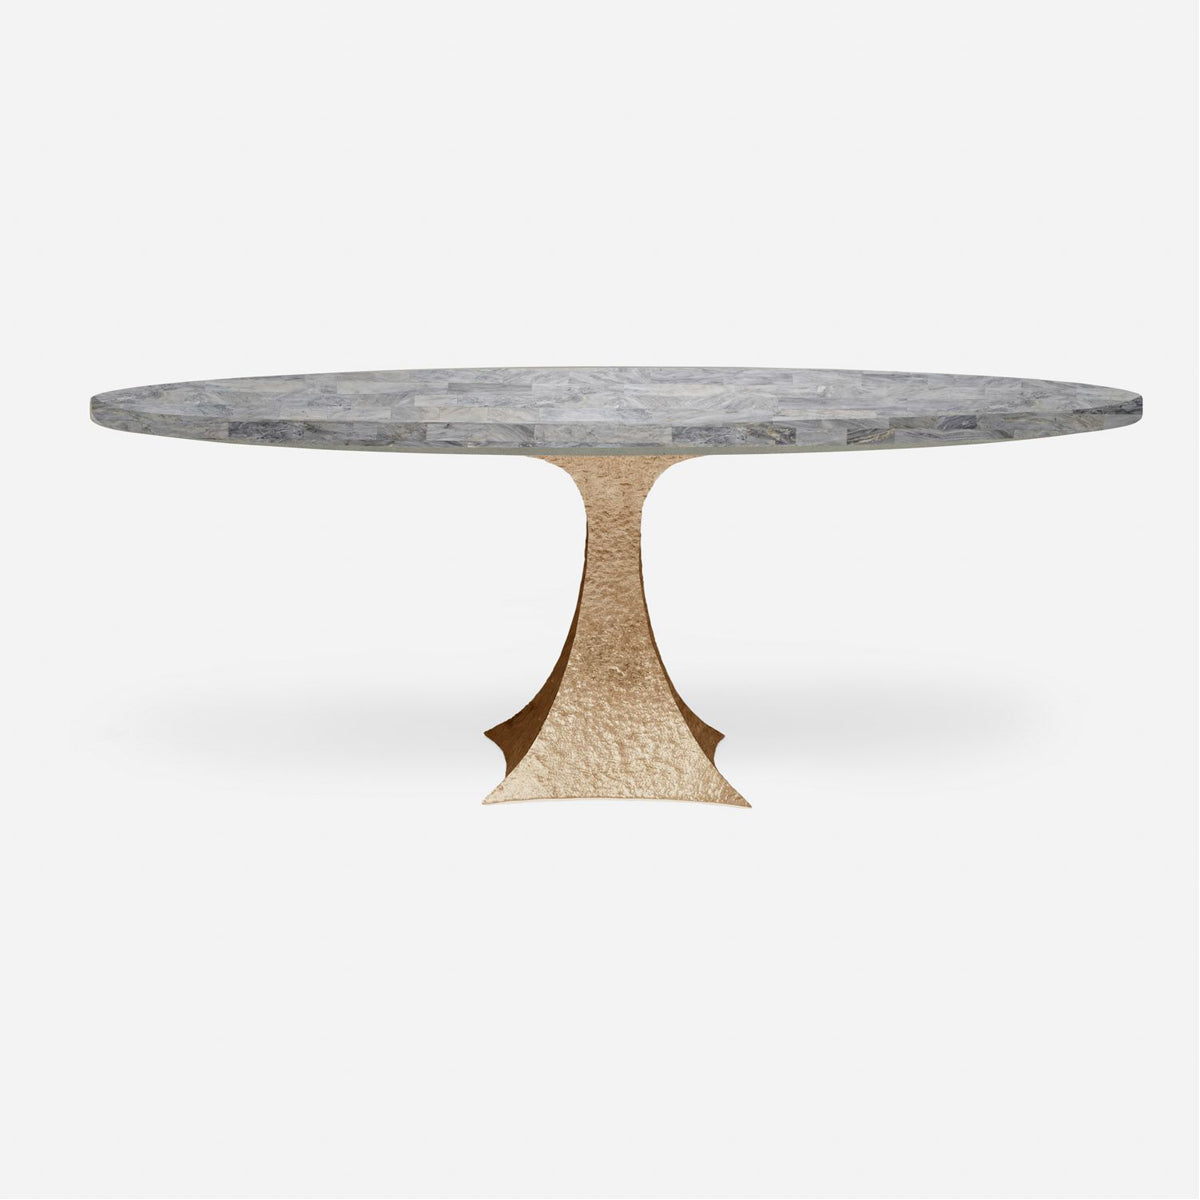 Made Goods Noor Oval Single Base Dining Table in Stone